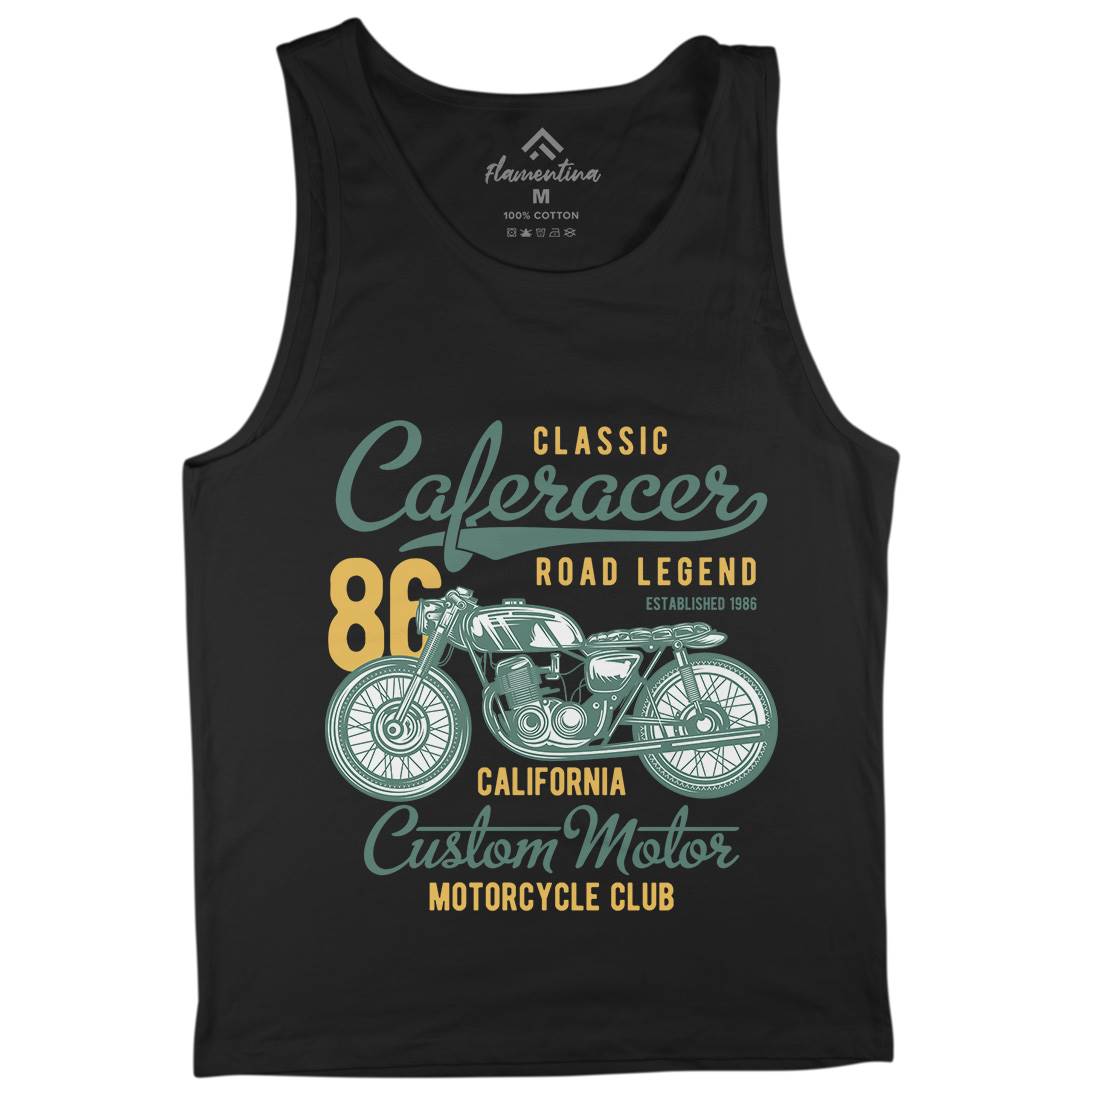 Caferacer Mens Tank Top Vest Motorcycles B834